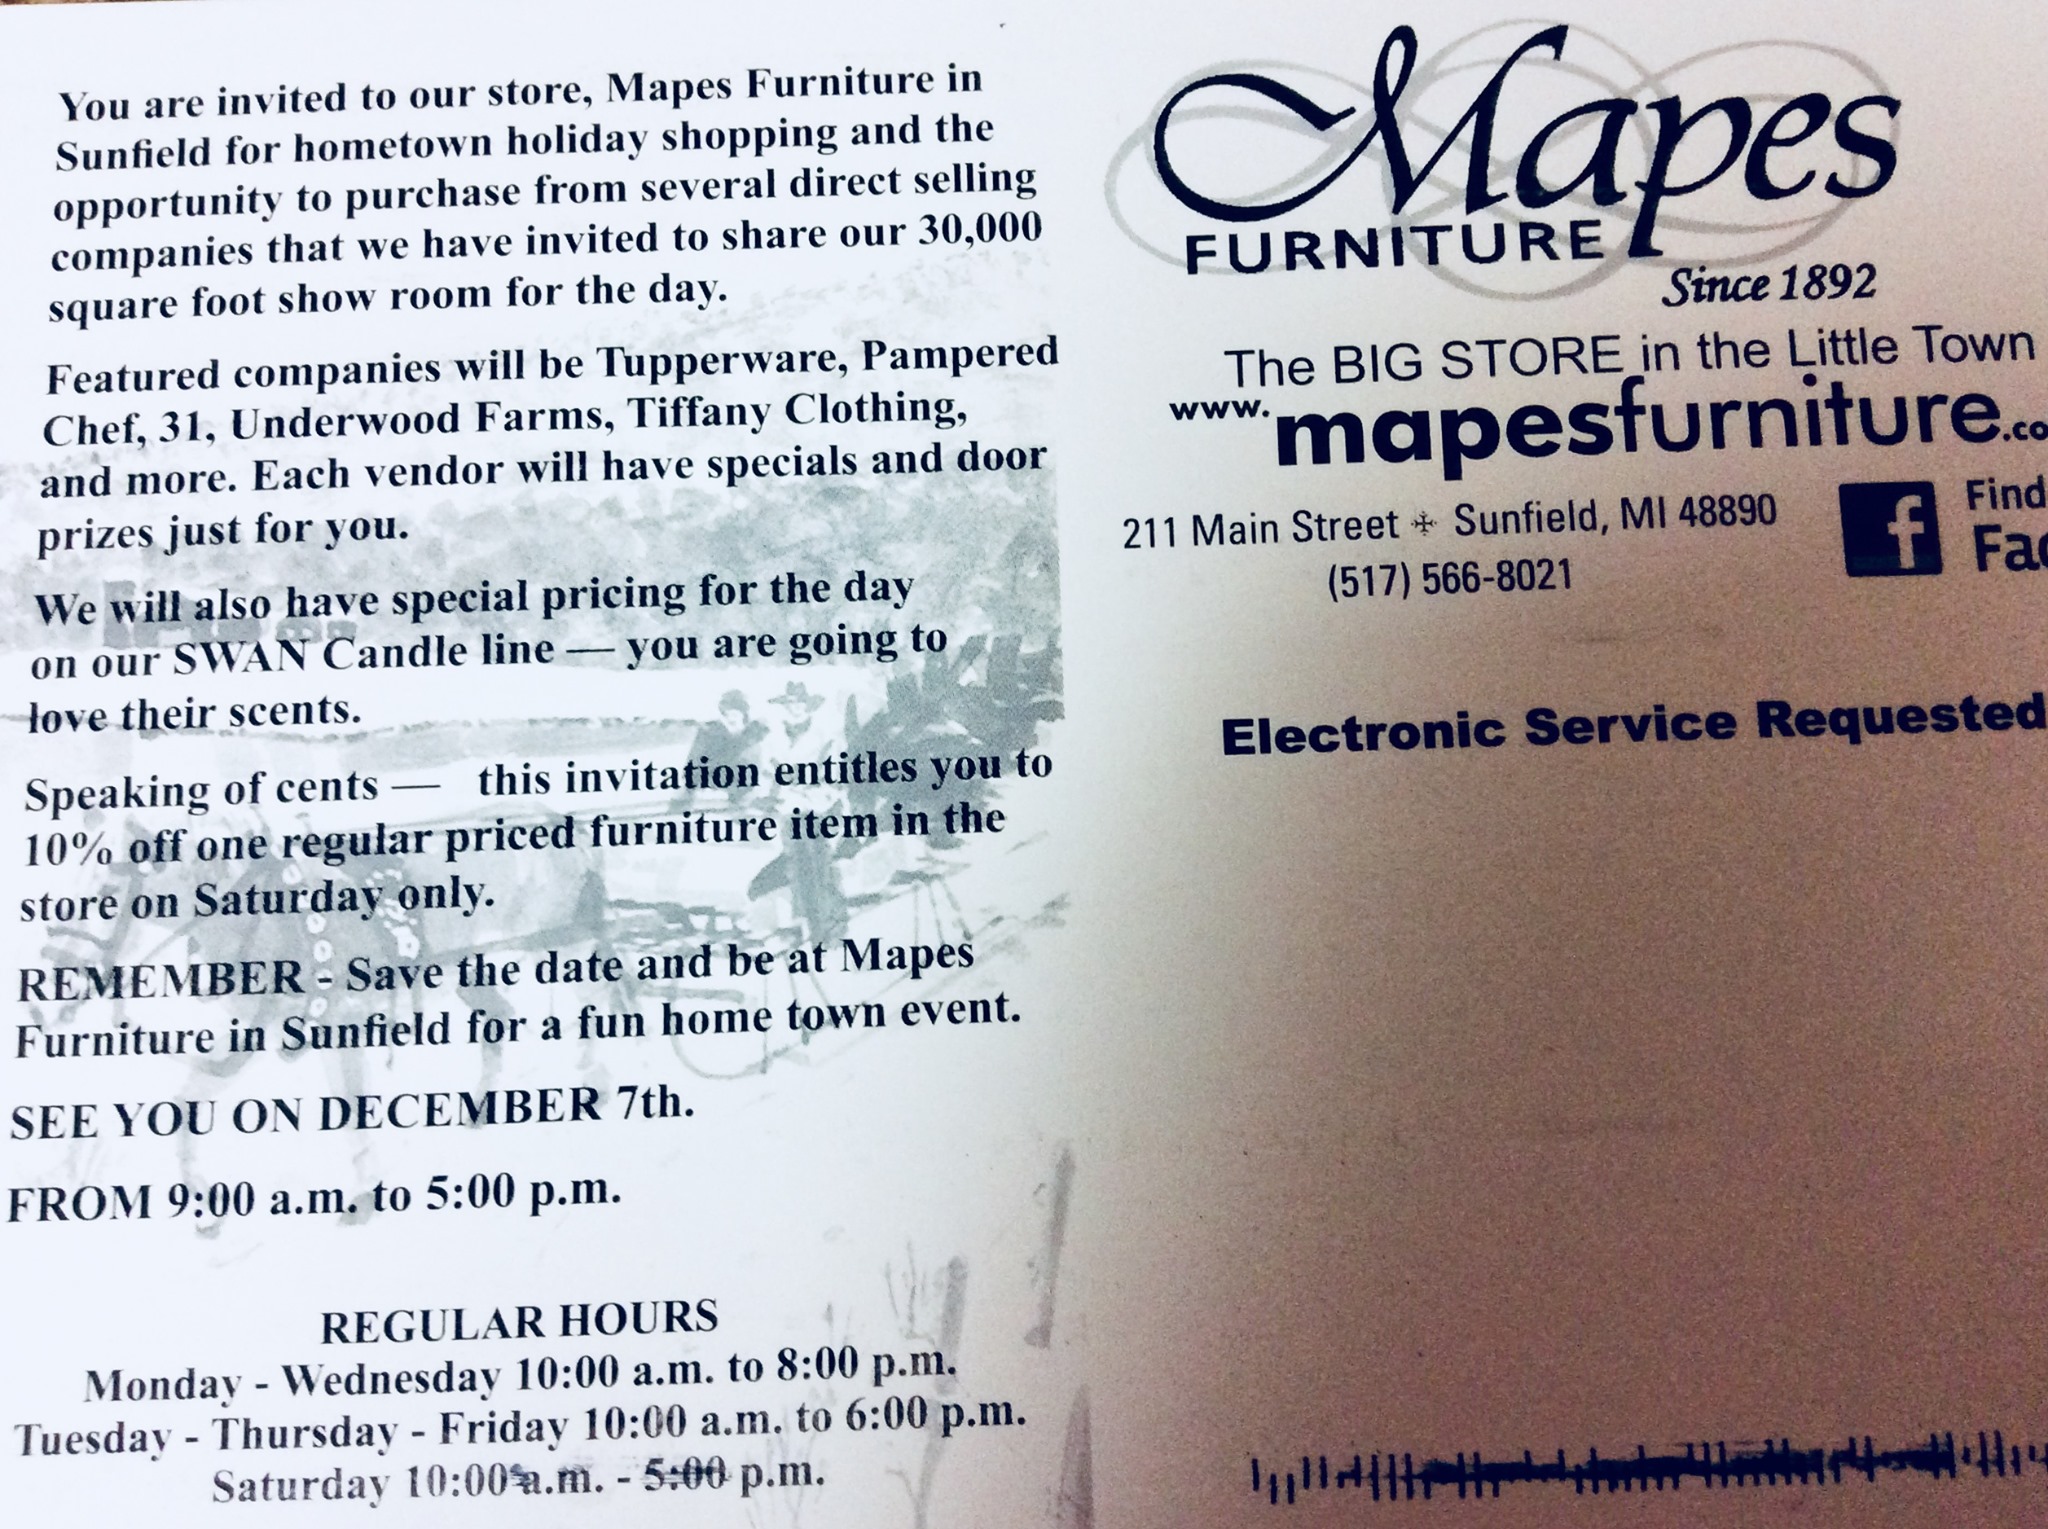 Mapes Furniture Co